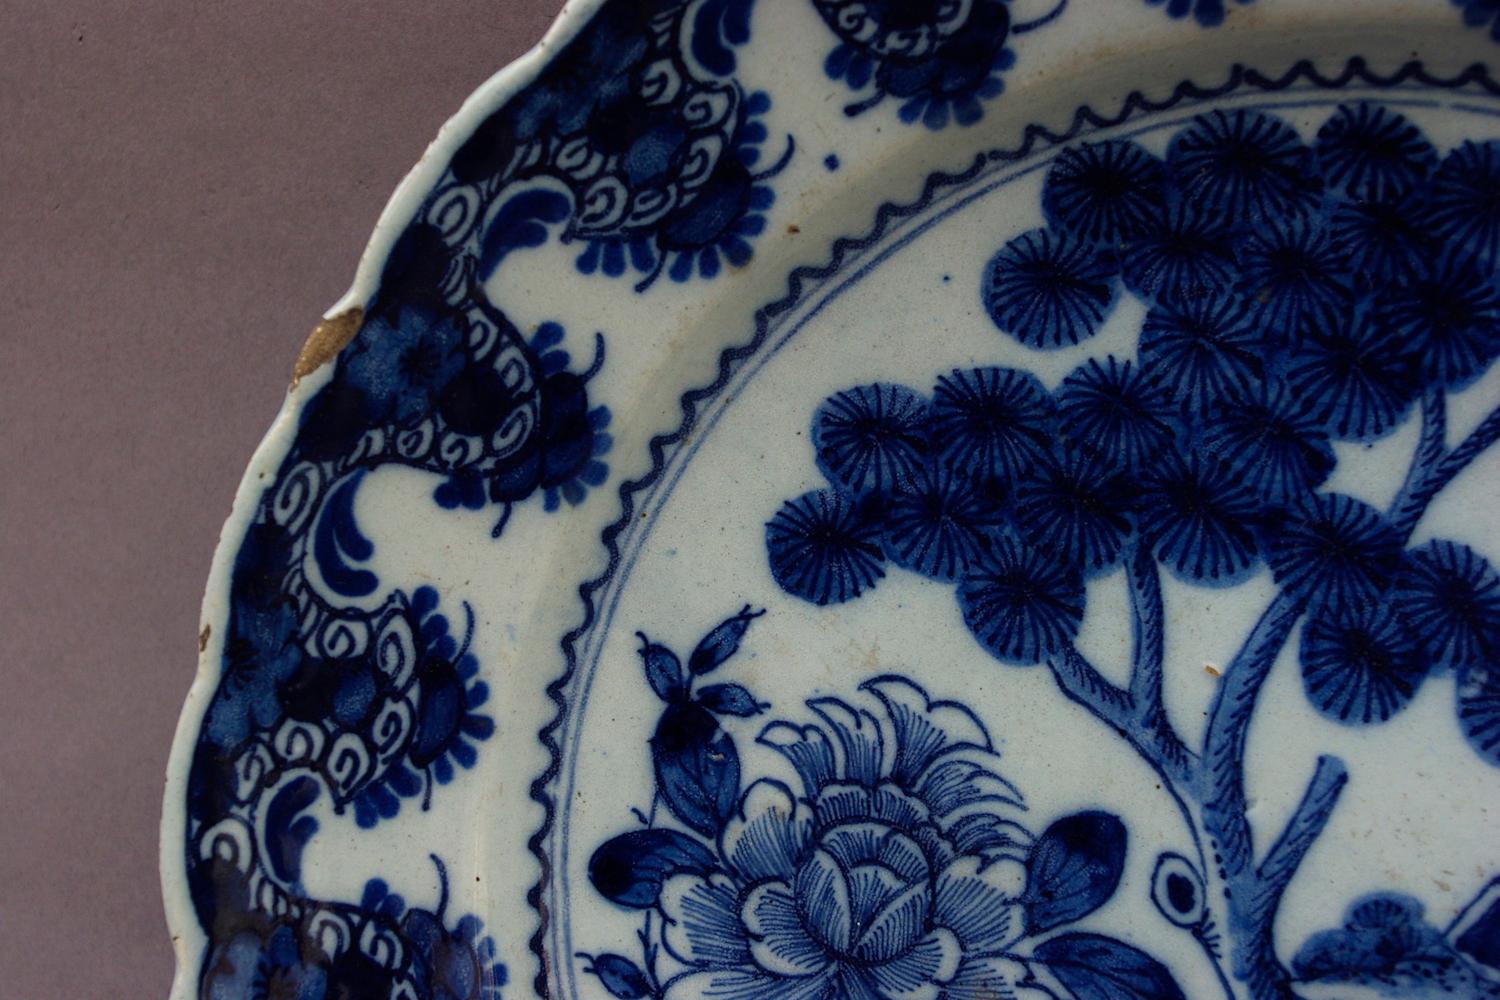 Pair of blue and white delftware plates imitating Chinese porcelains. Blue decoration on a white background underlined with a trek, representing a tree surrounded by flowers in vases. Lambrequins and stylized plants friezes inside, typical of this